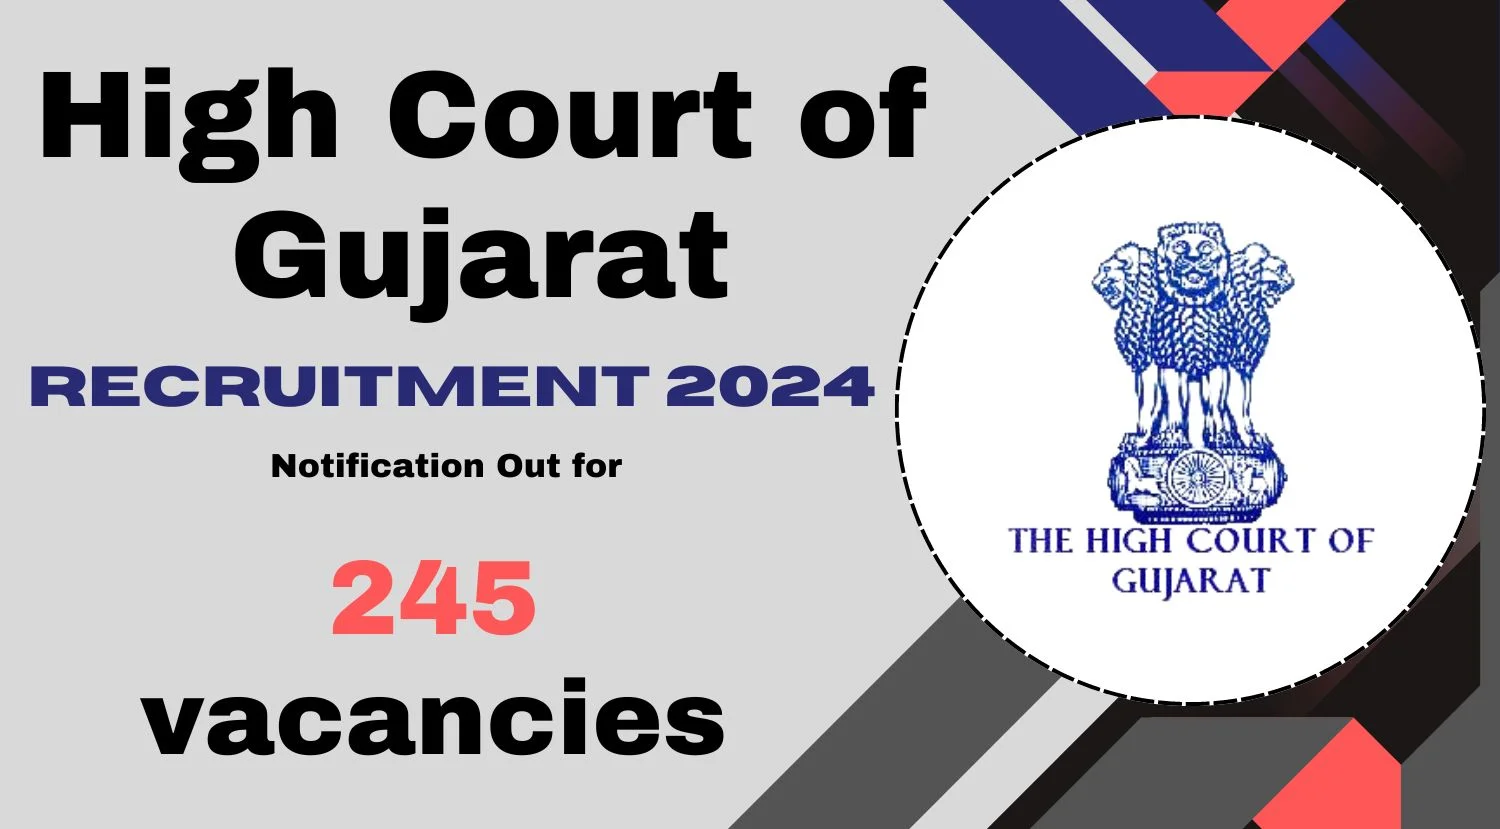 High Court of Gujarat Recruitment 2024 Notification Out for 245 vacancies Apply Now